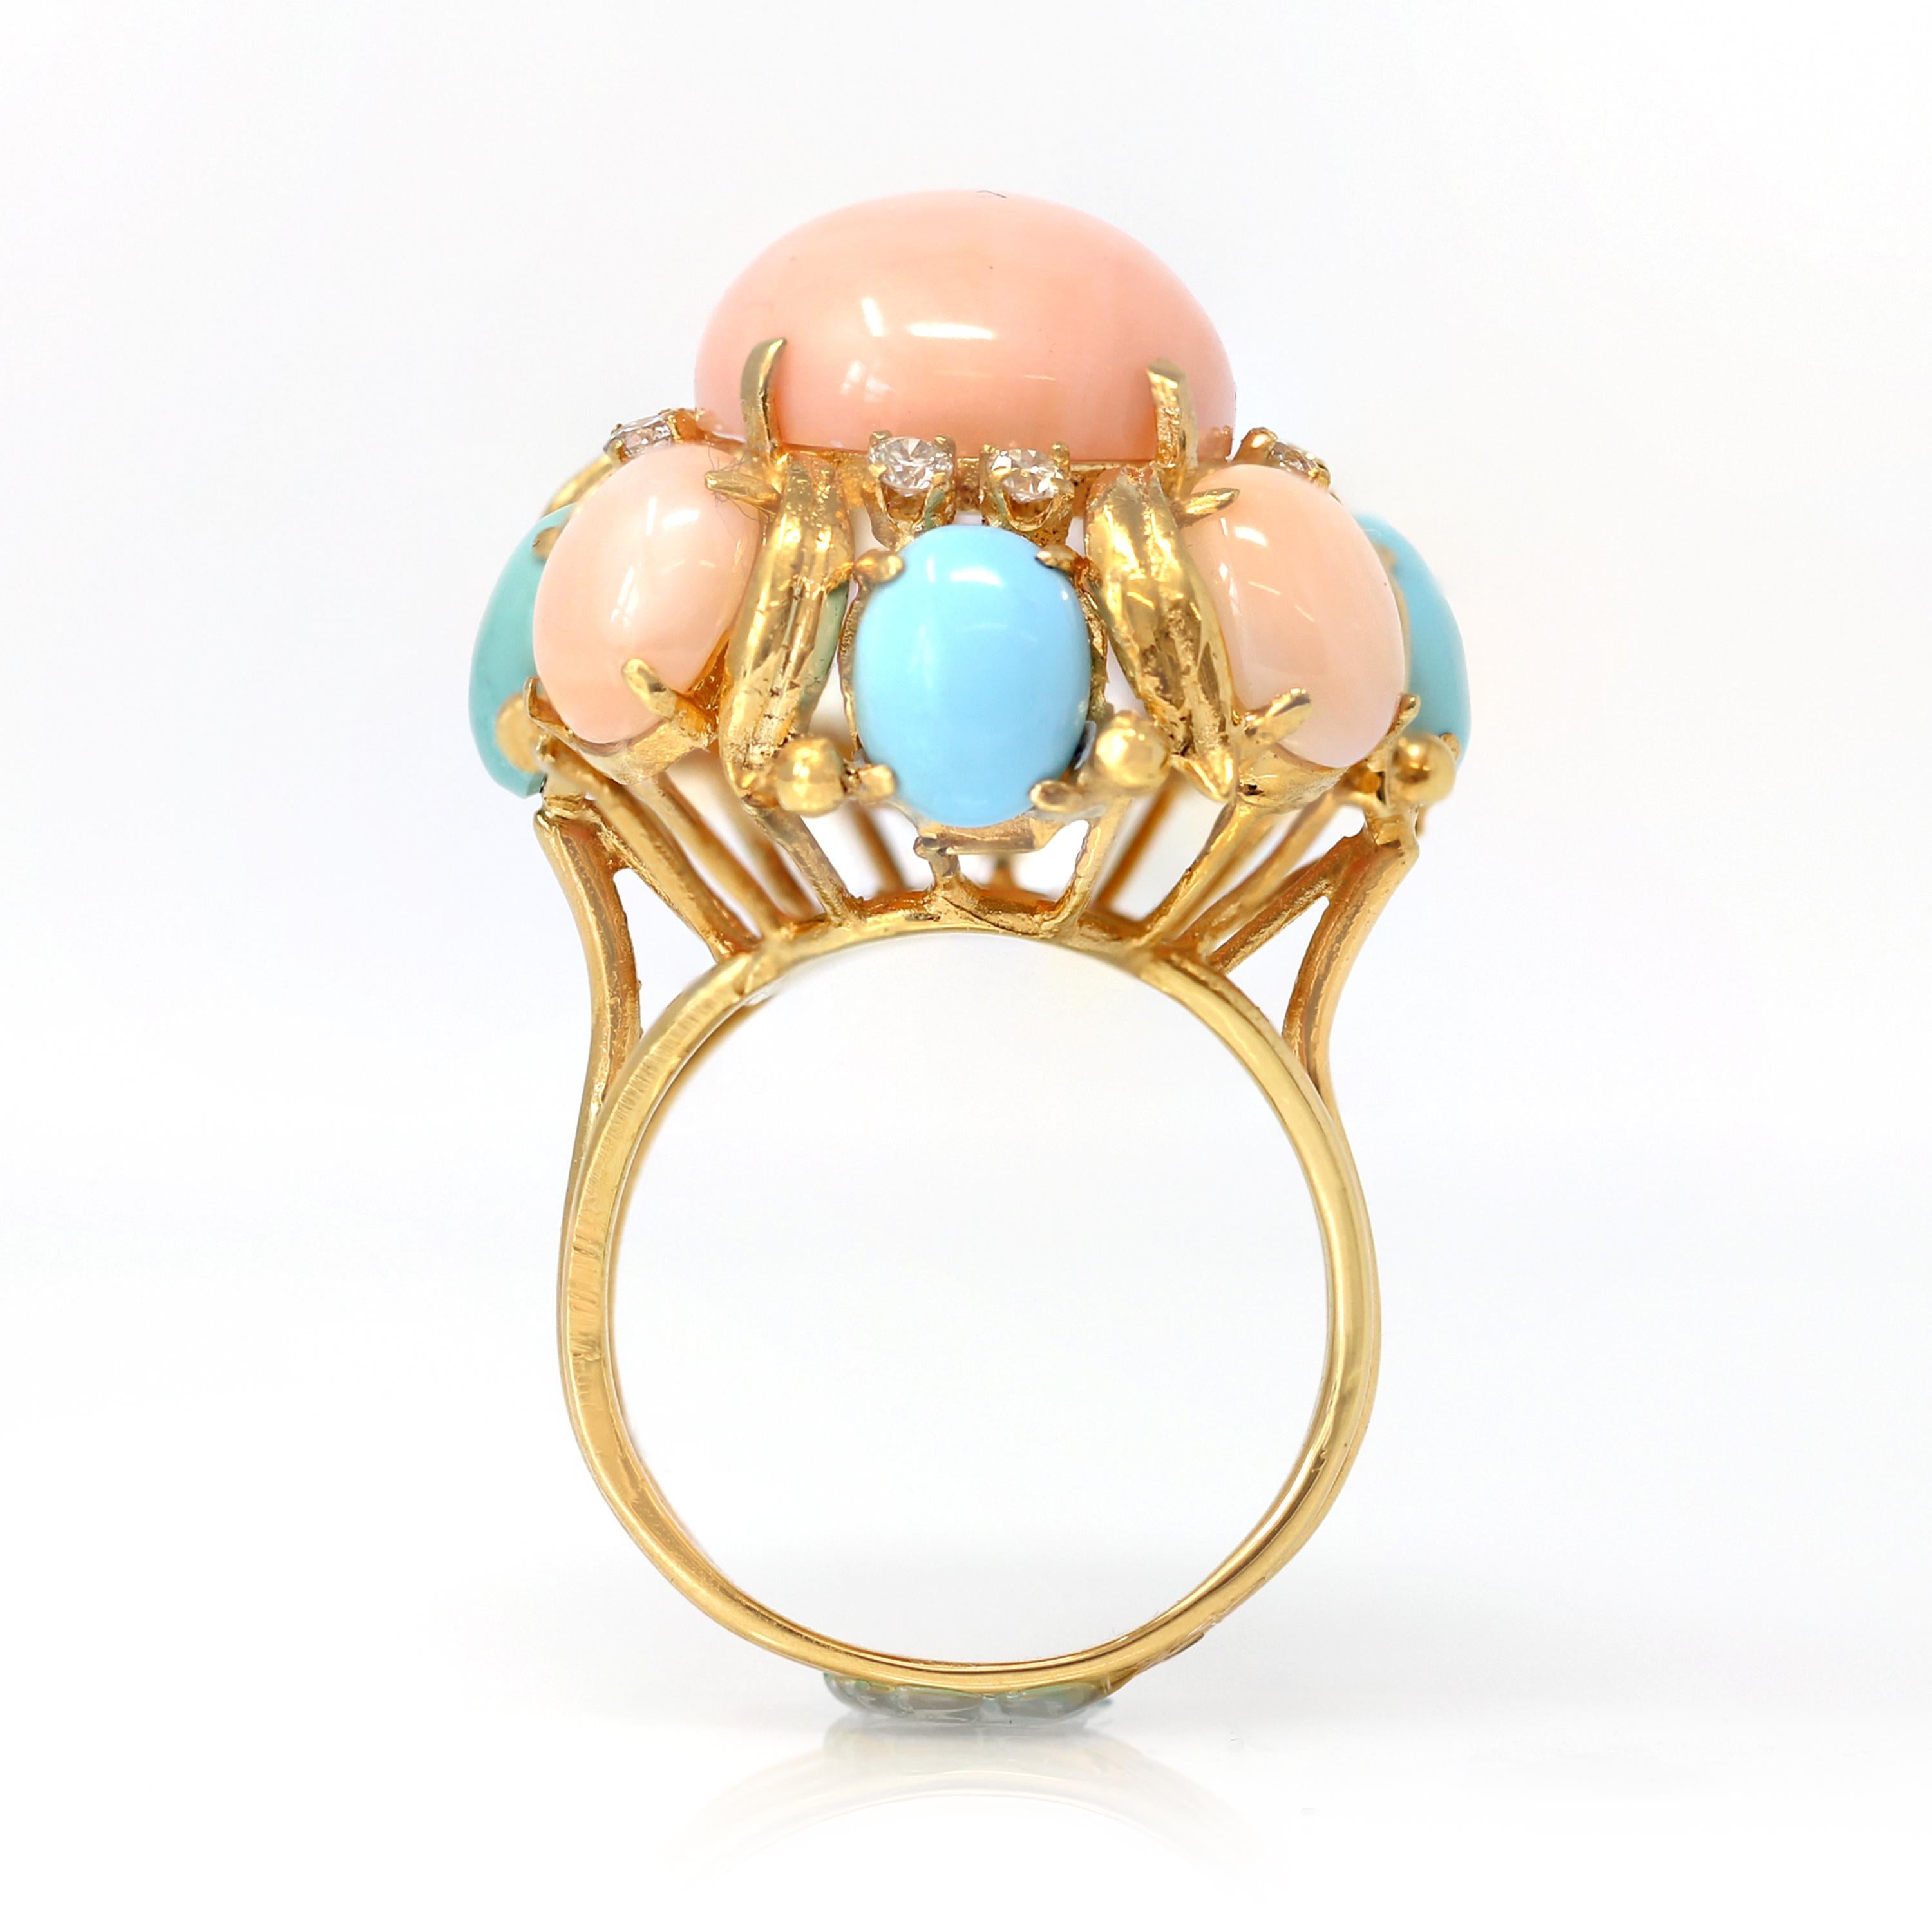 A ravishing Angel skin coral, turquoise and Diamond ring, set in 14k yellow gold circa 1970, the ring is a size 10&1/4 and would be easily sizable. This very attractive Angel skin coral and turquoise cabochon ring is an original vintage piece from